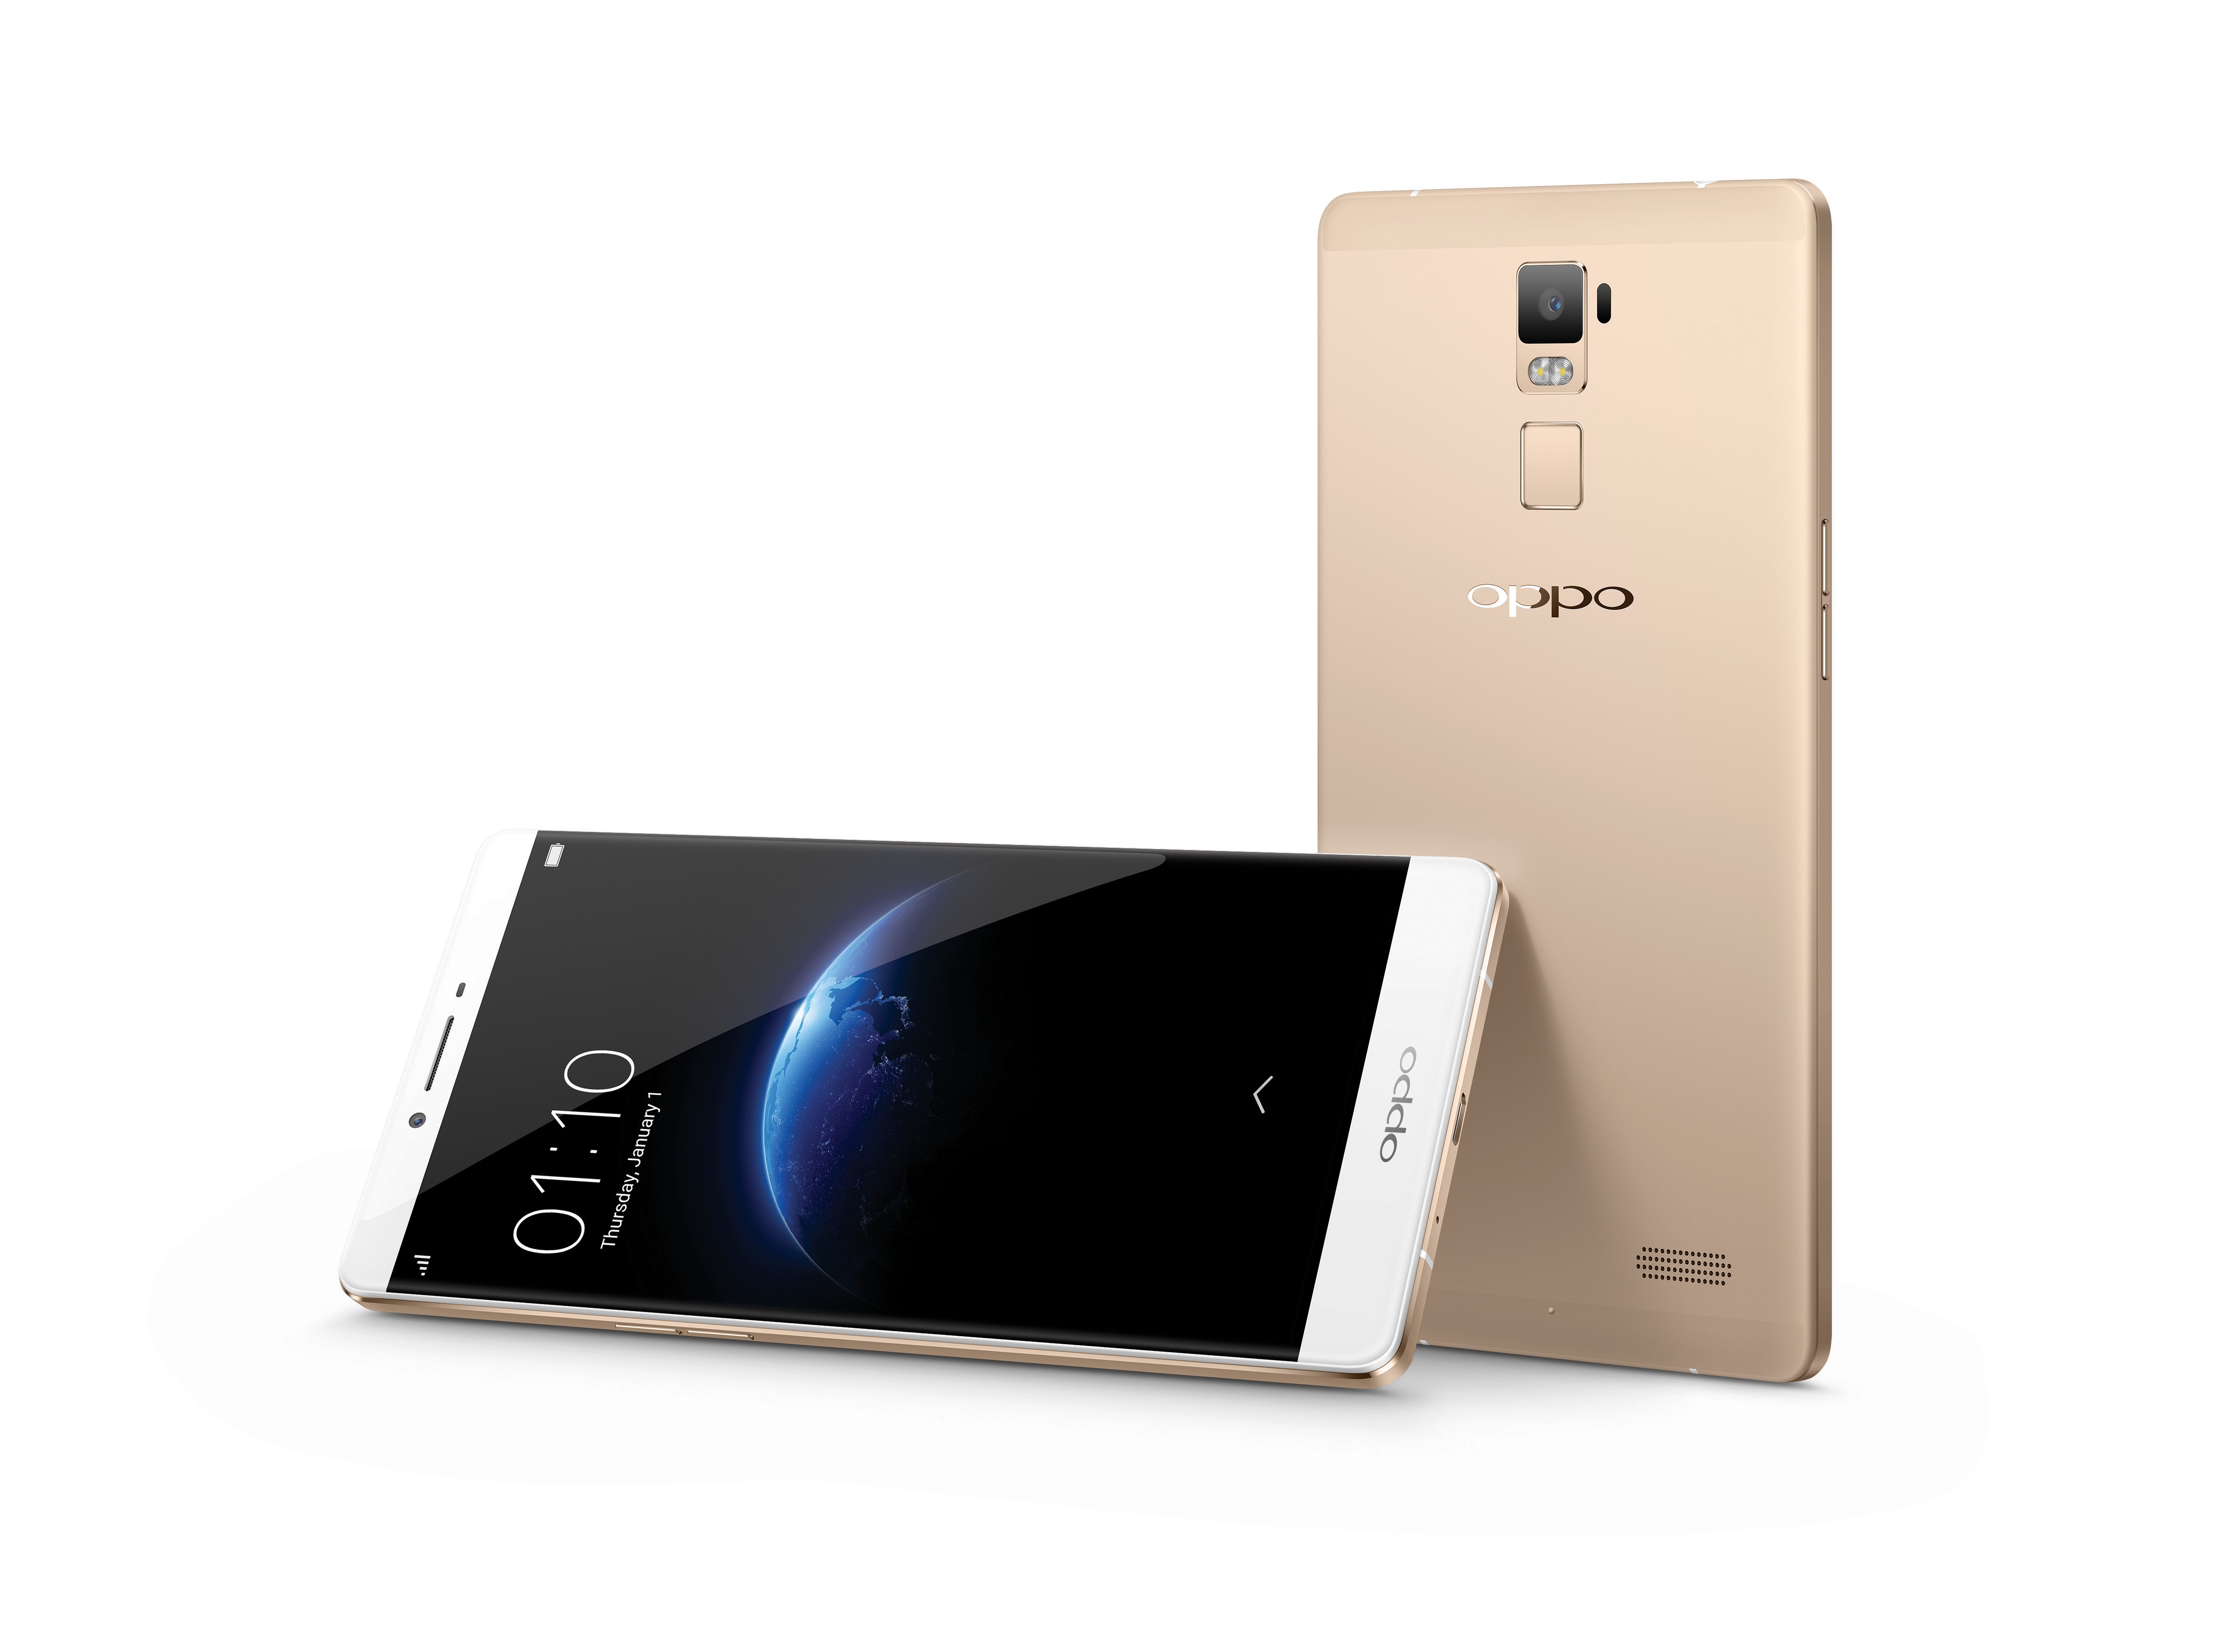 Want an OPPO R7 Plus? Here’s a chance for you!